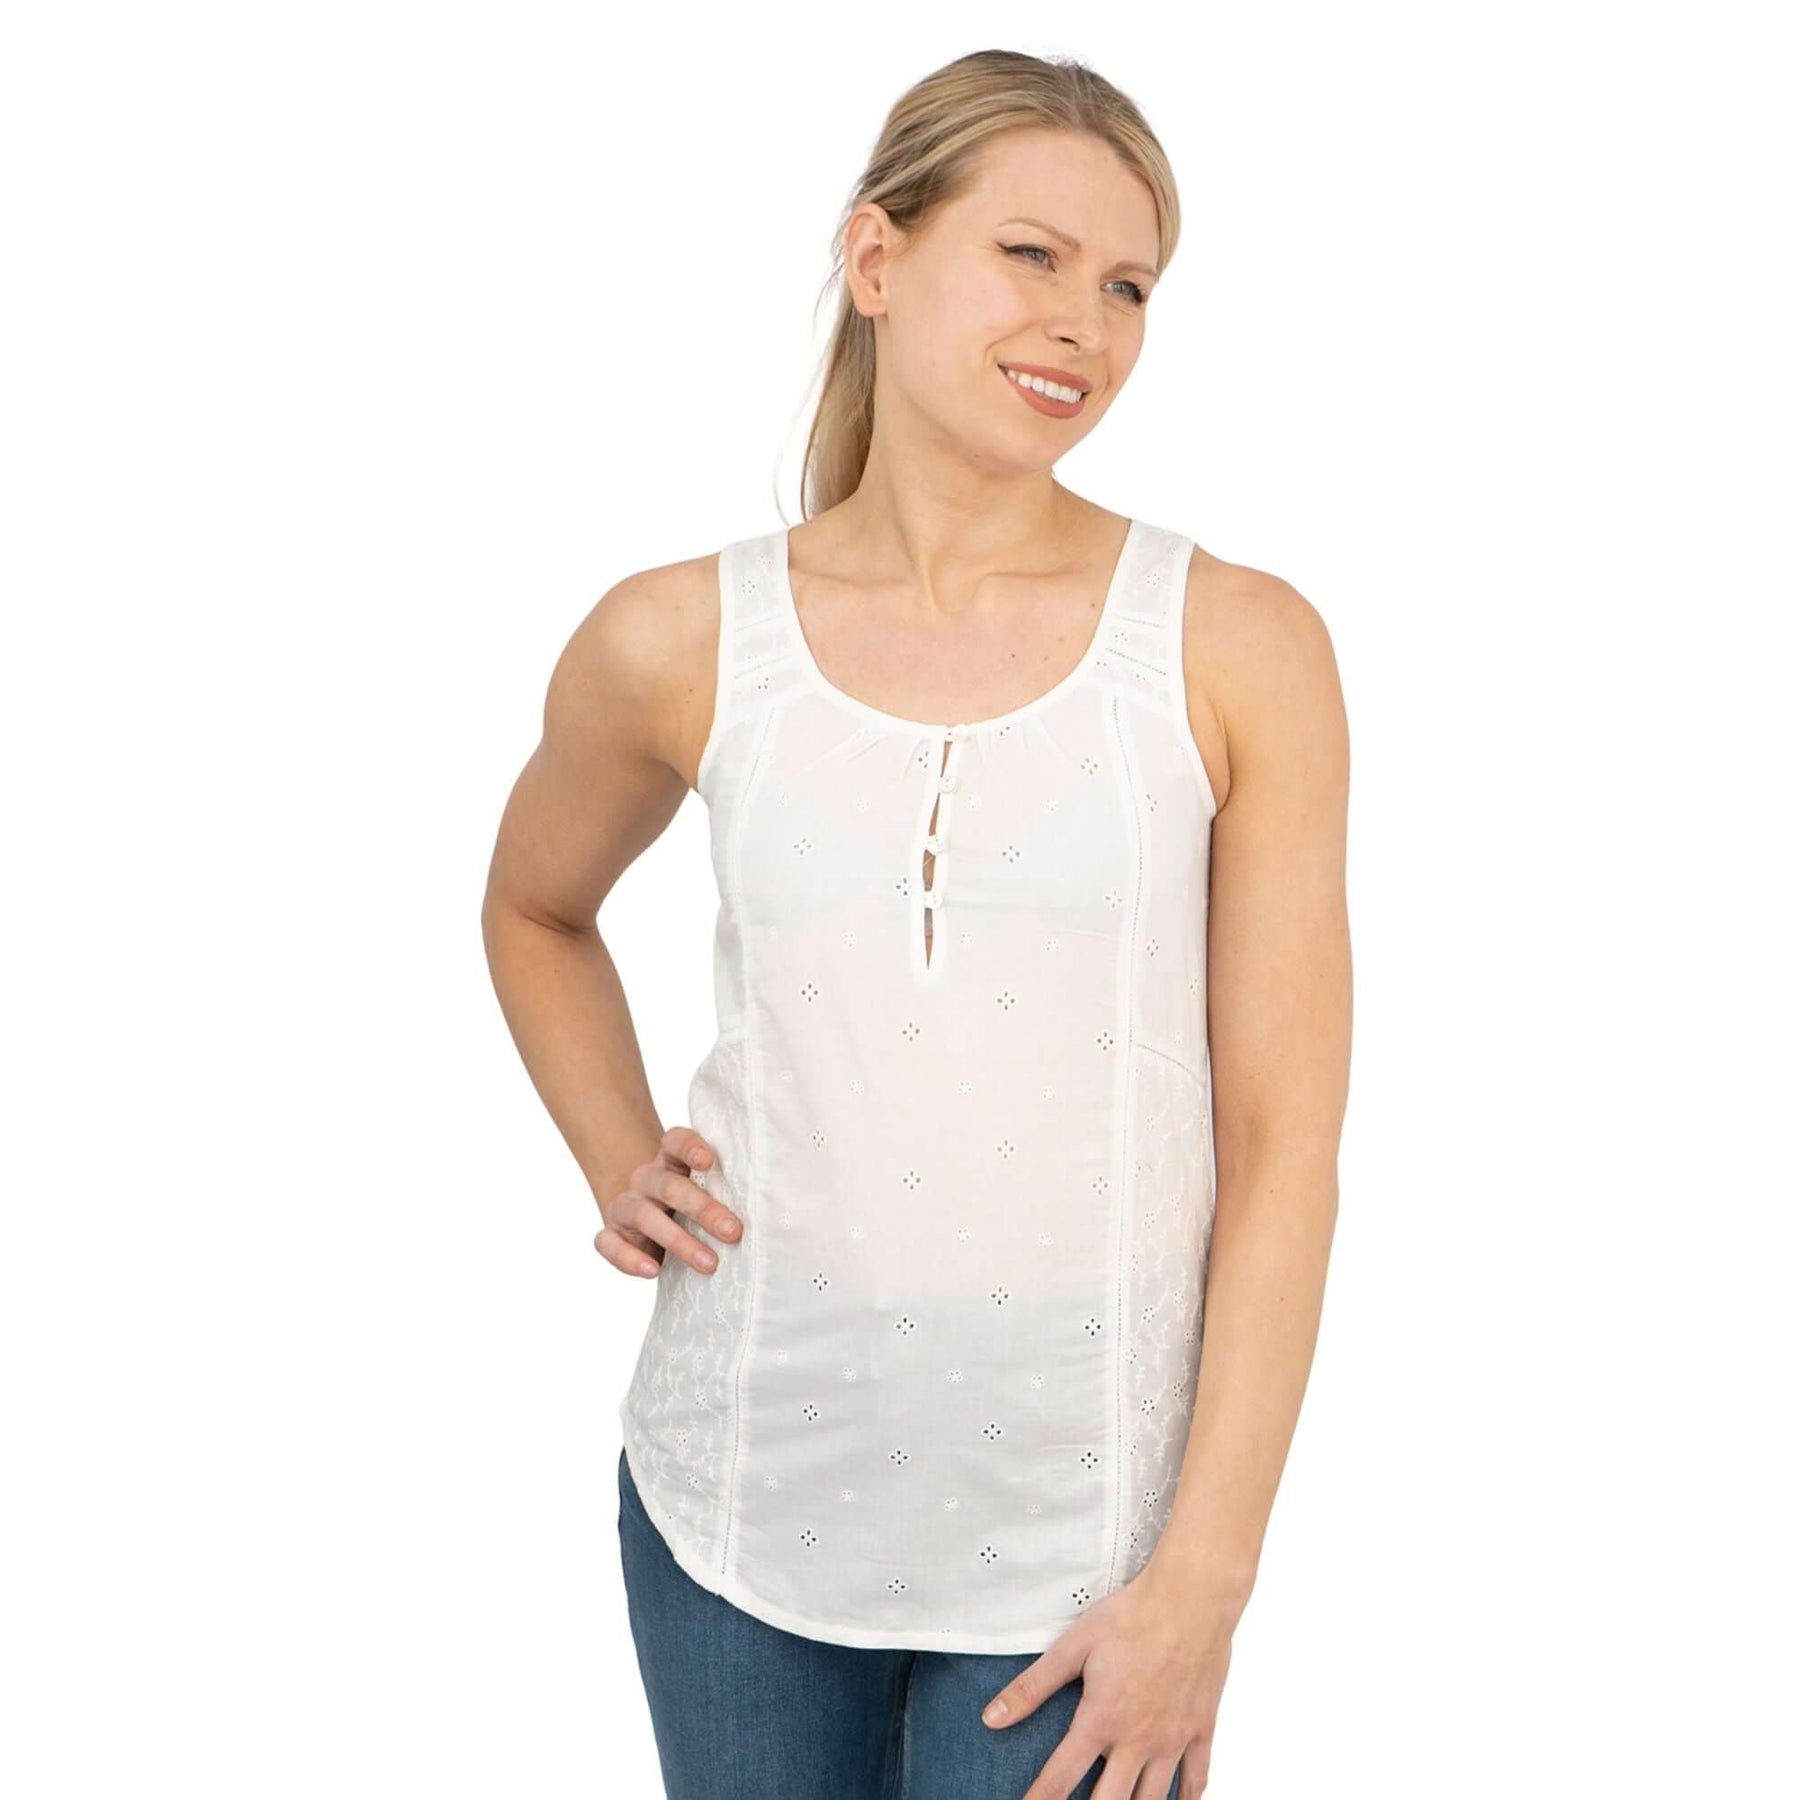 Womens White Sleeveless Lightweight Cotton Vests Floral Embroidery